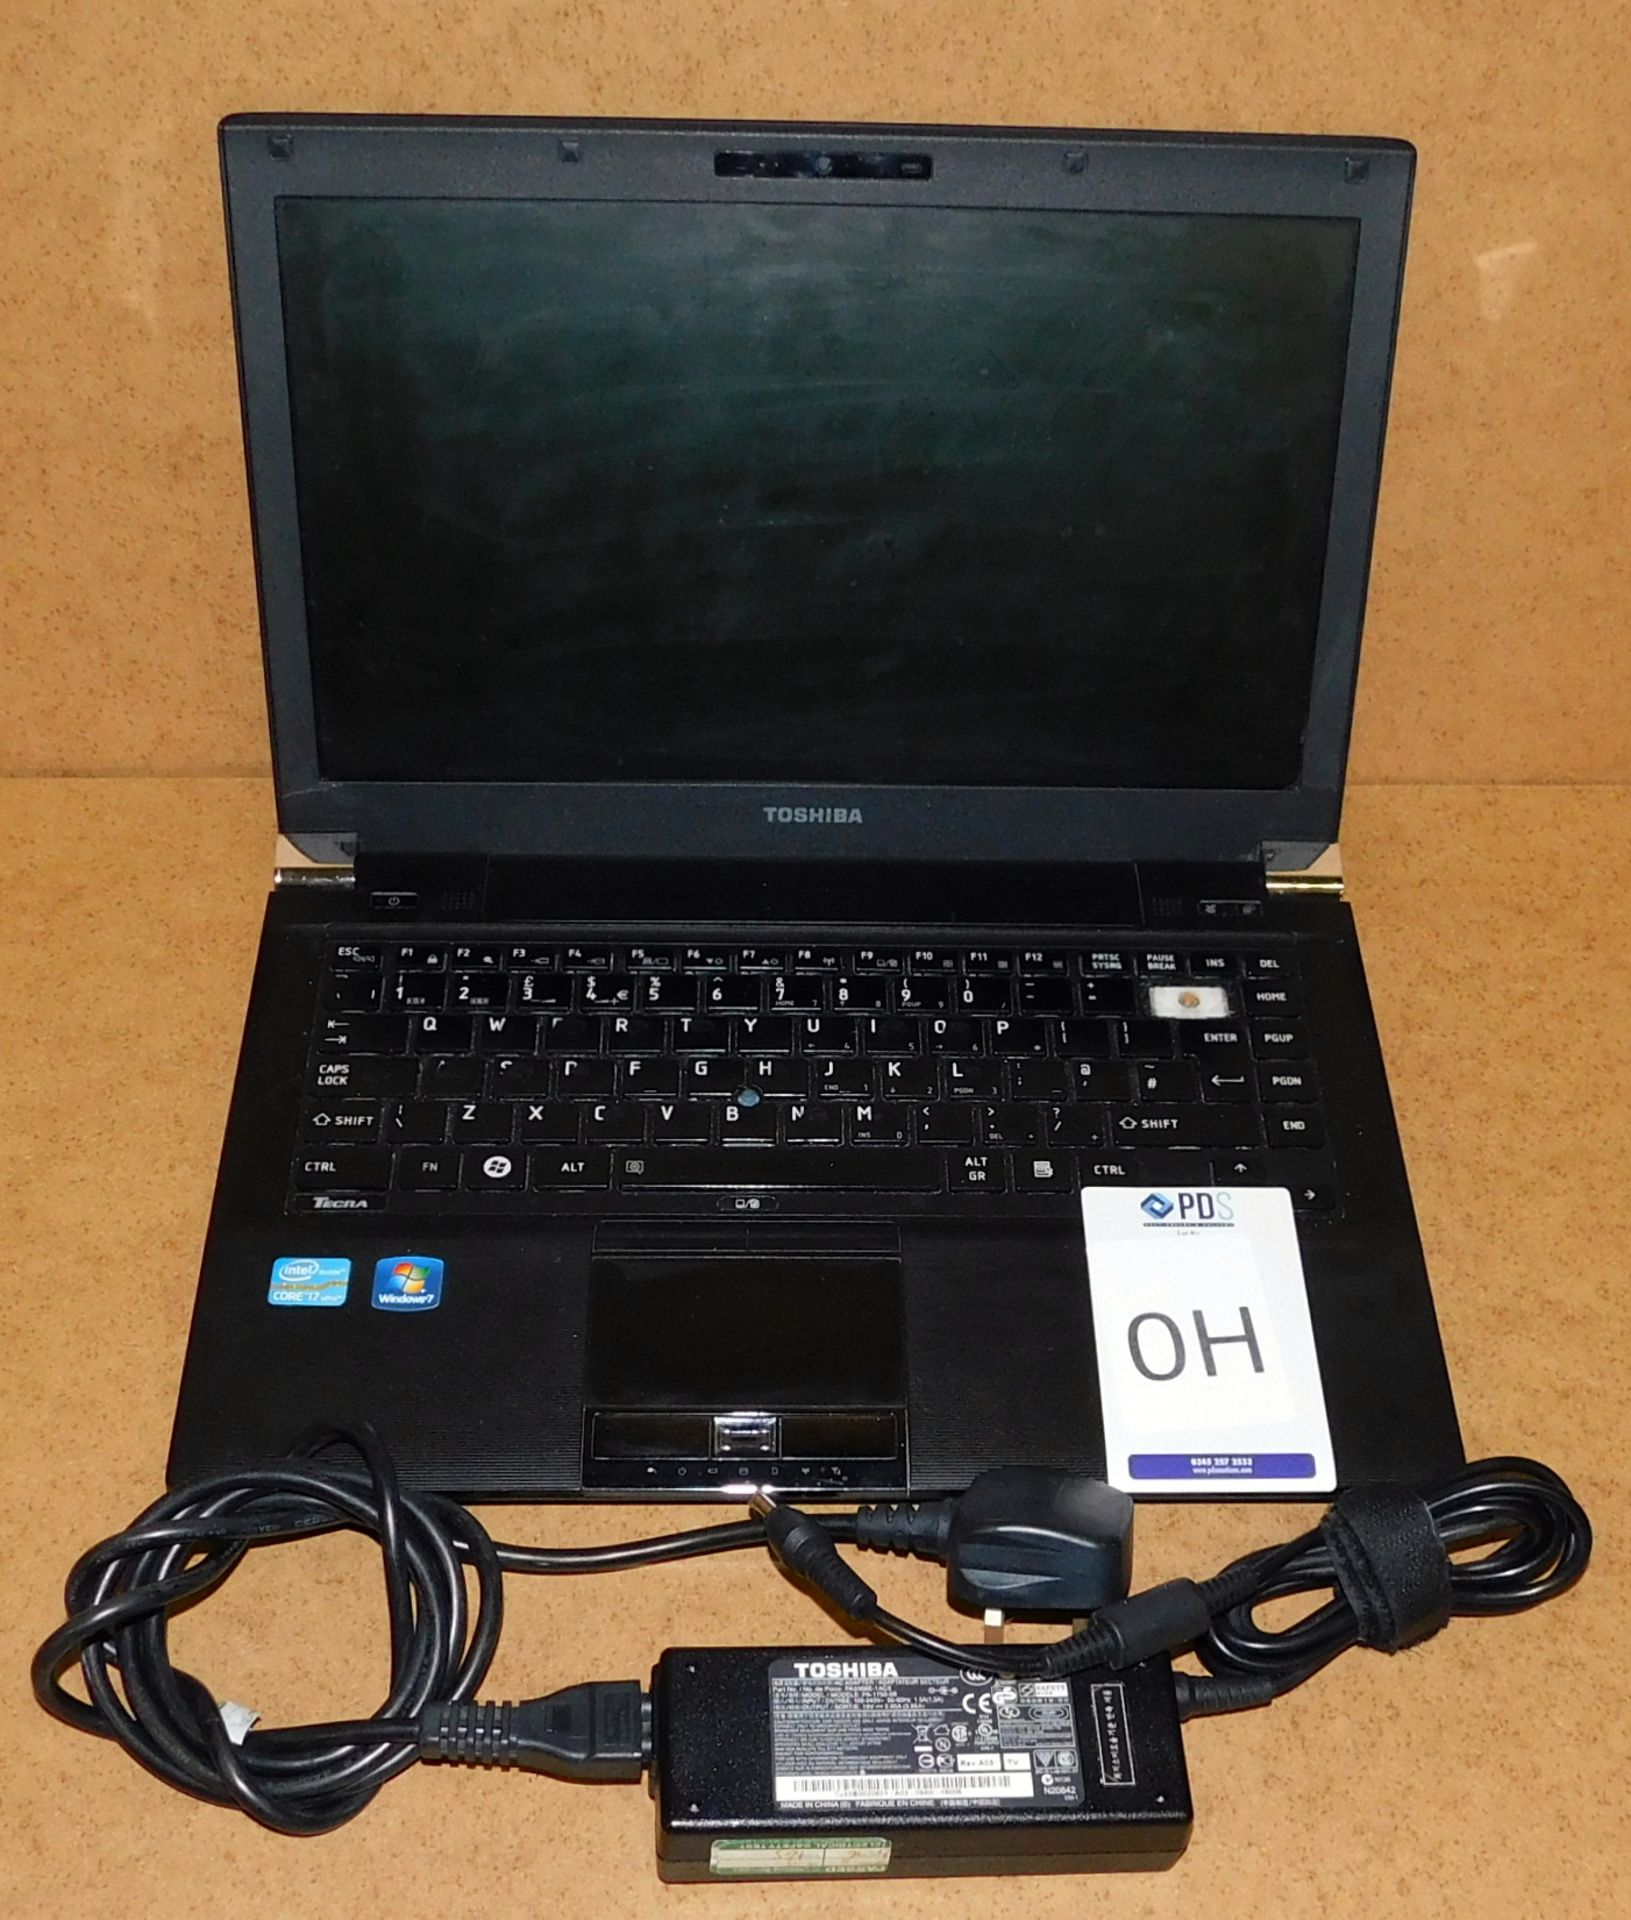 Toshiba Tecra R840-12F Laptop, i7 V Pro Processor (no HDD) with Charger